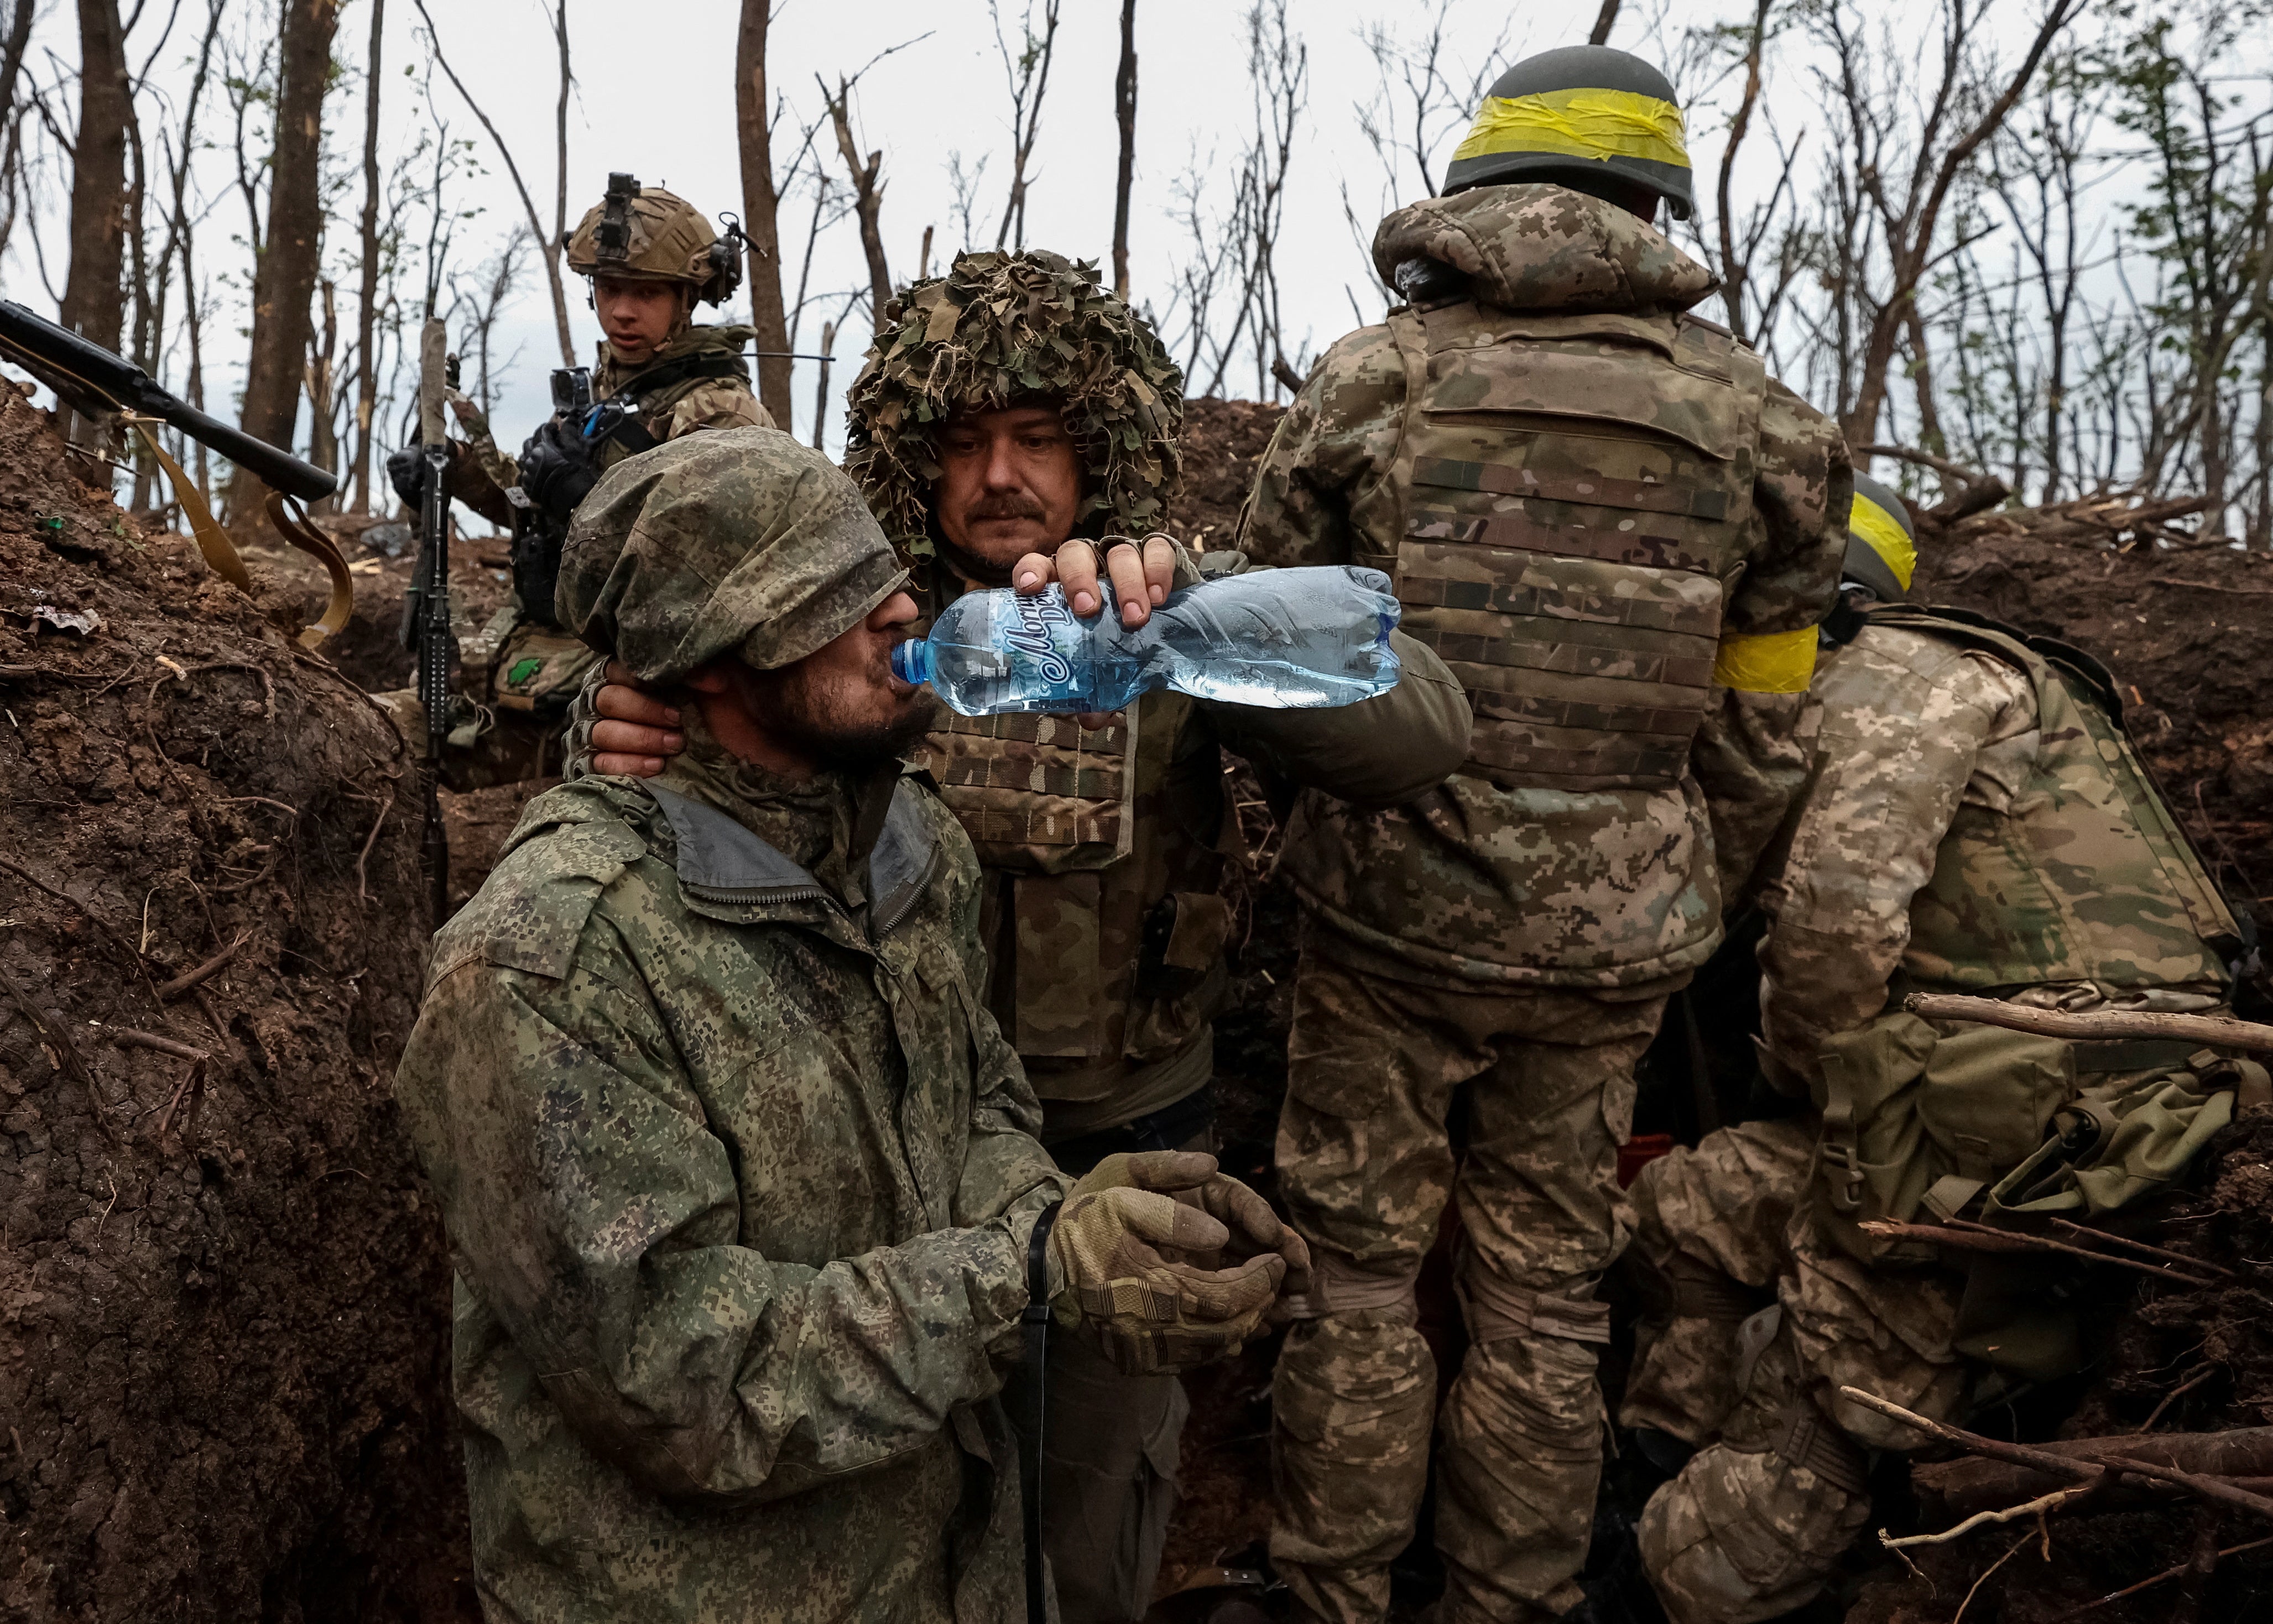 Ukraine makes gains in Bakhmut amid talks of spring offensive; Wagner tantrum continues